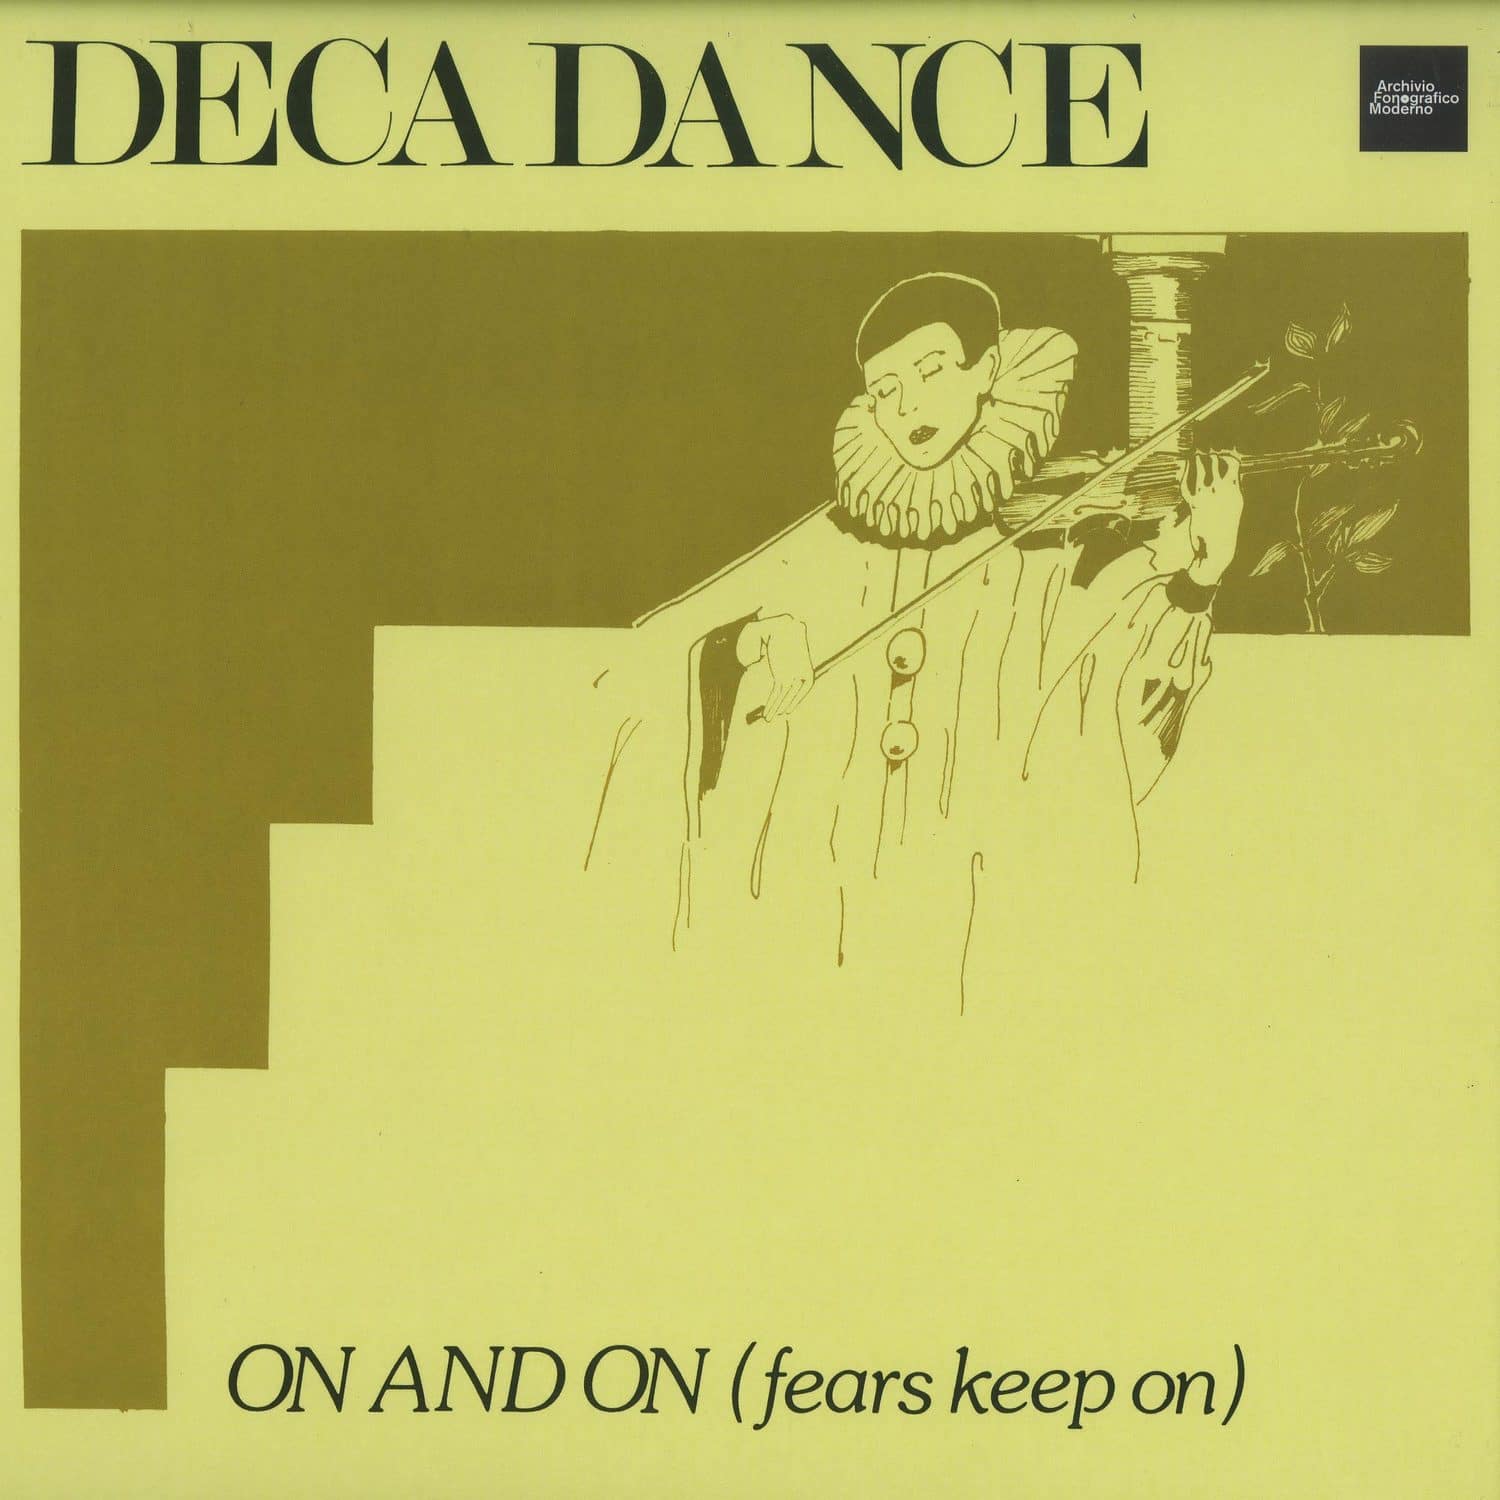 Decadance - ON AND ON 